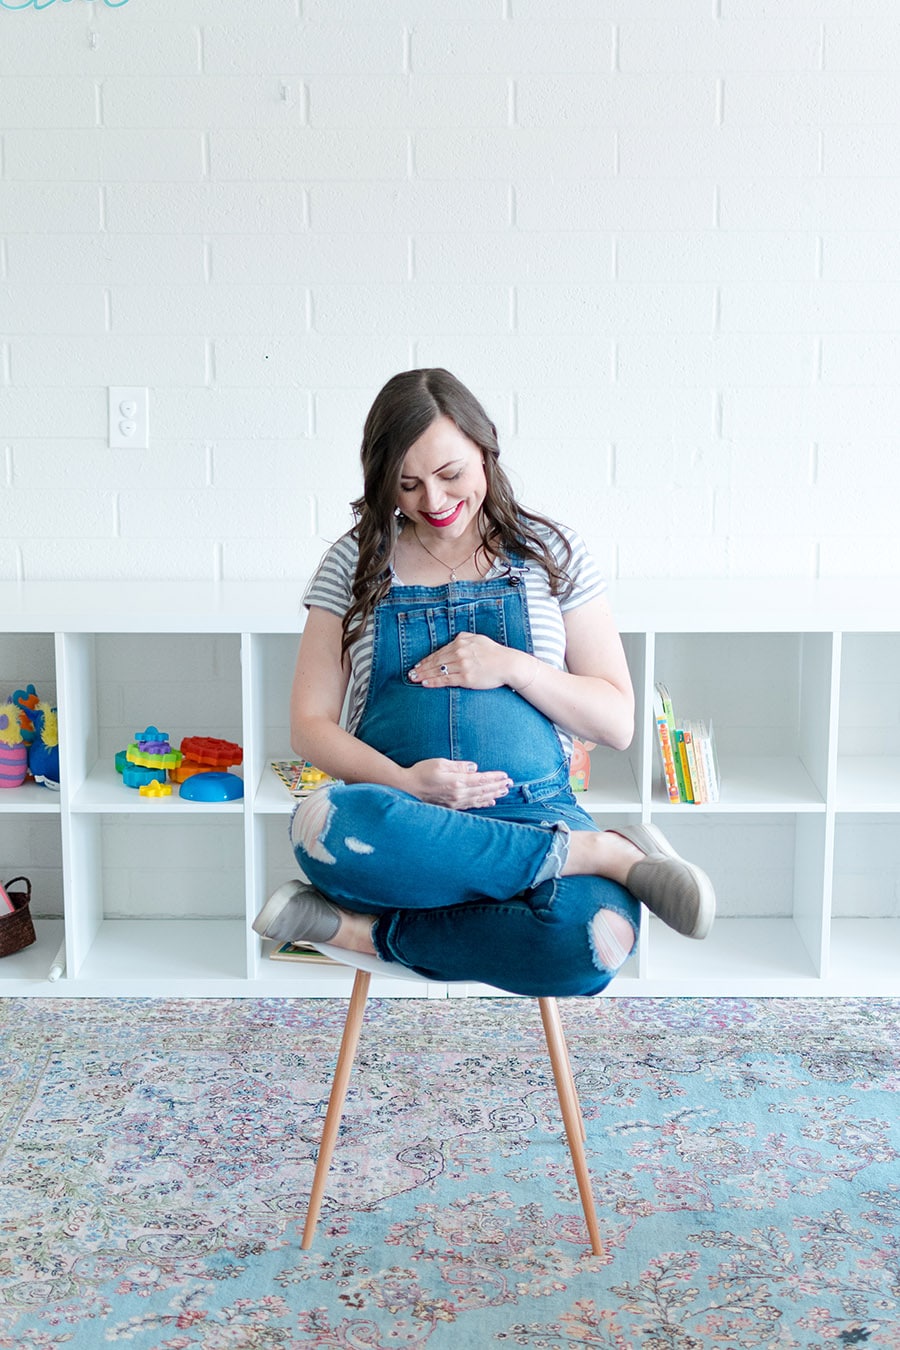 Preparing for Second Baby: Practical Tips